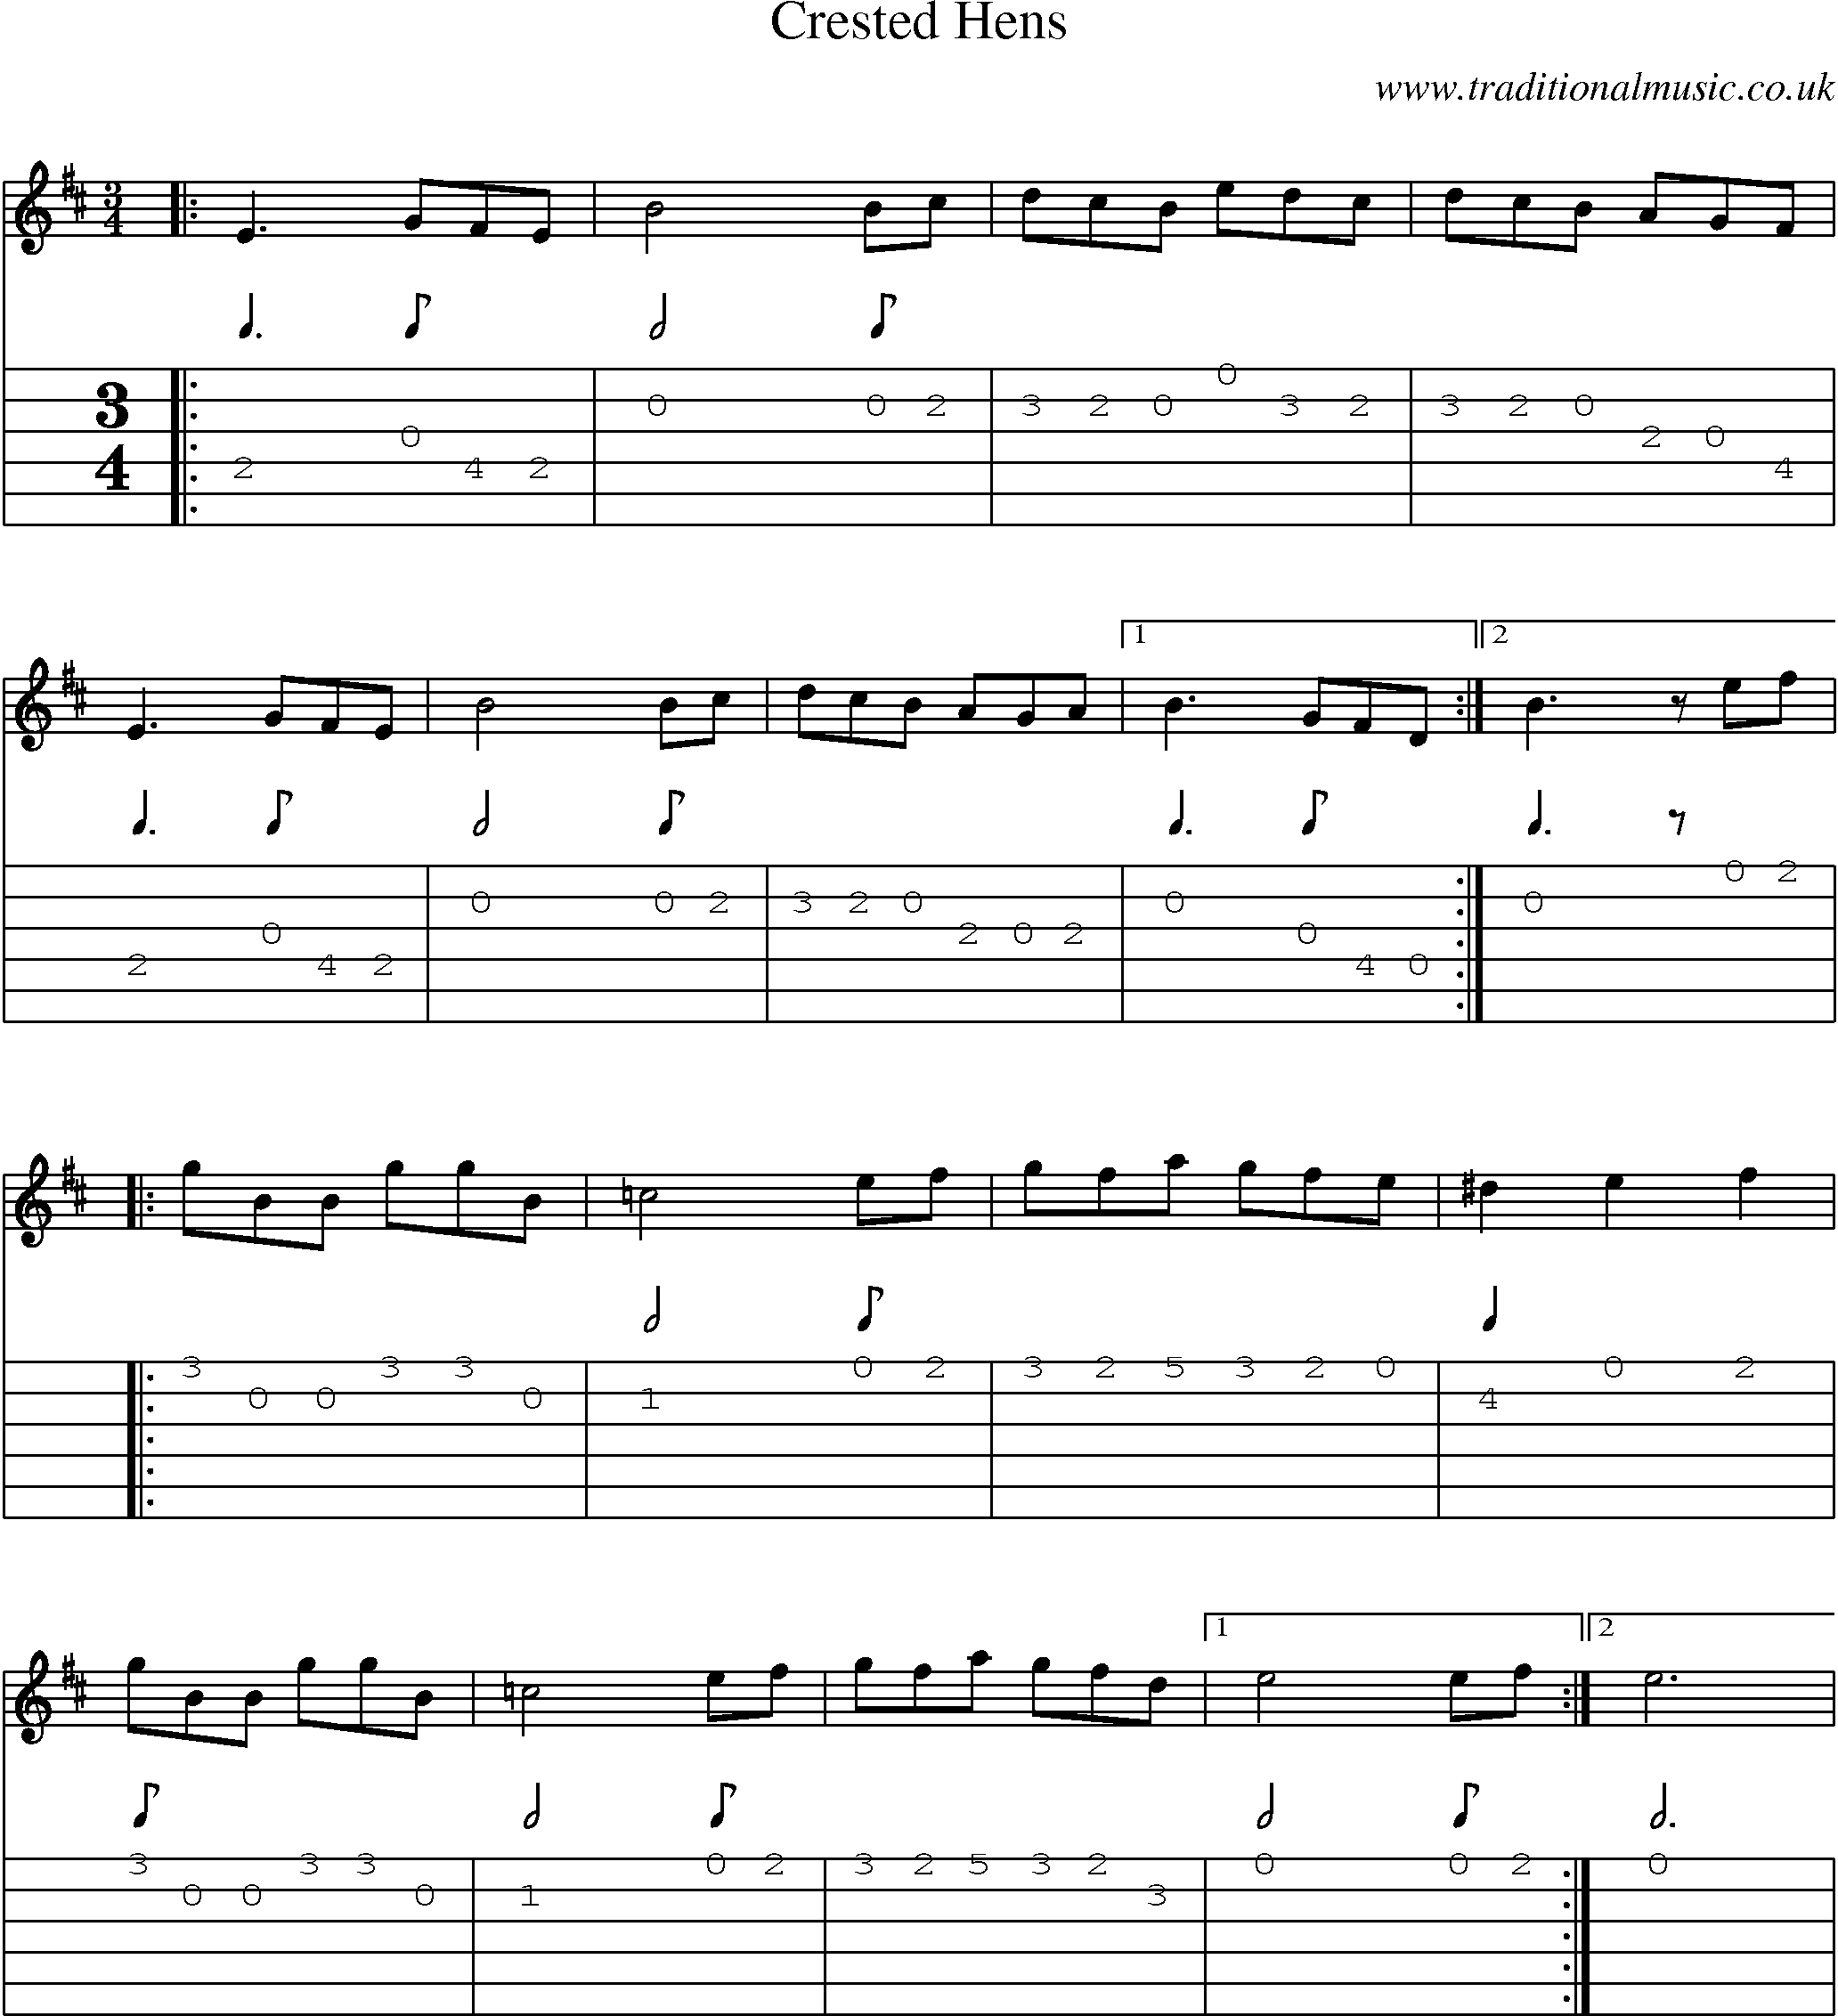 Music Score and Guitar Tabs for Crested Hens